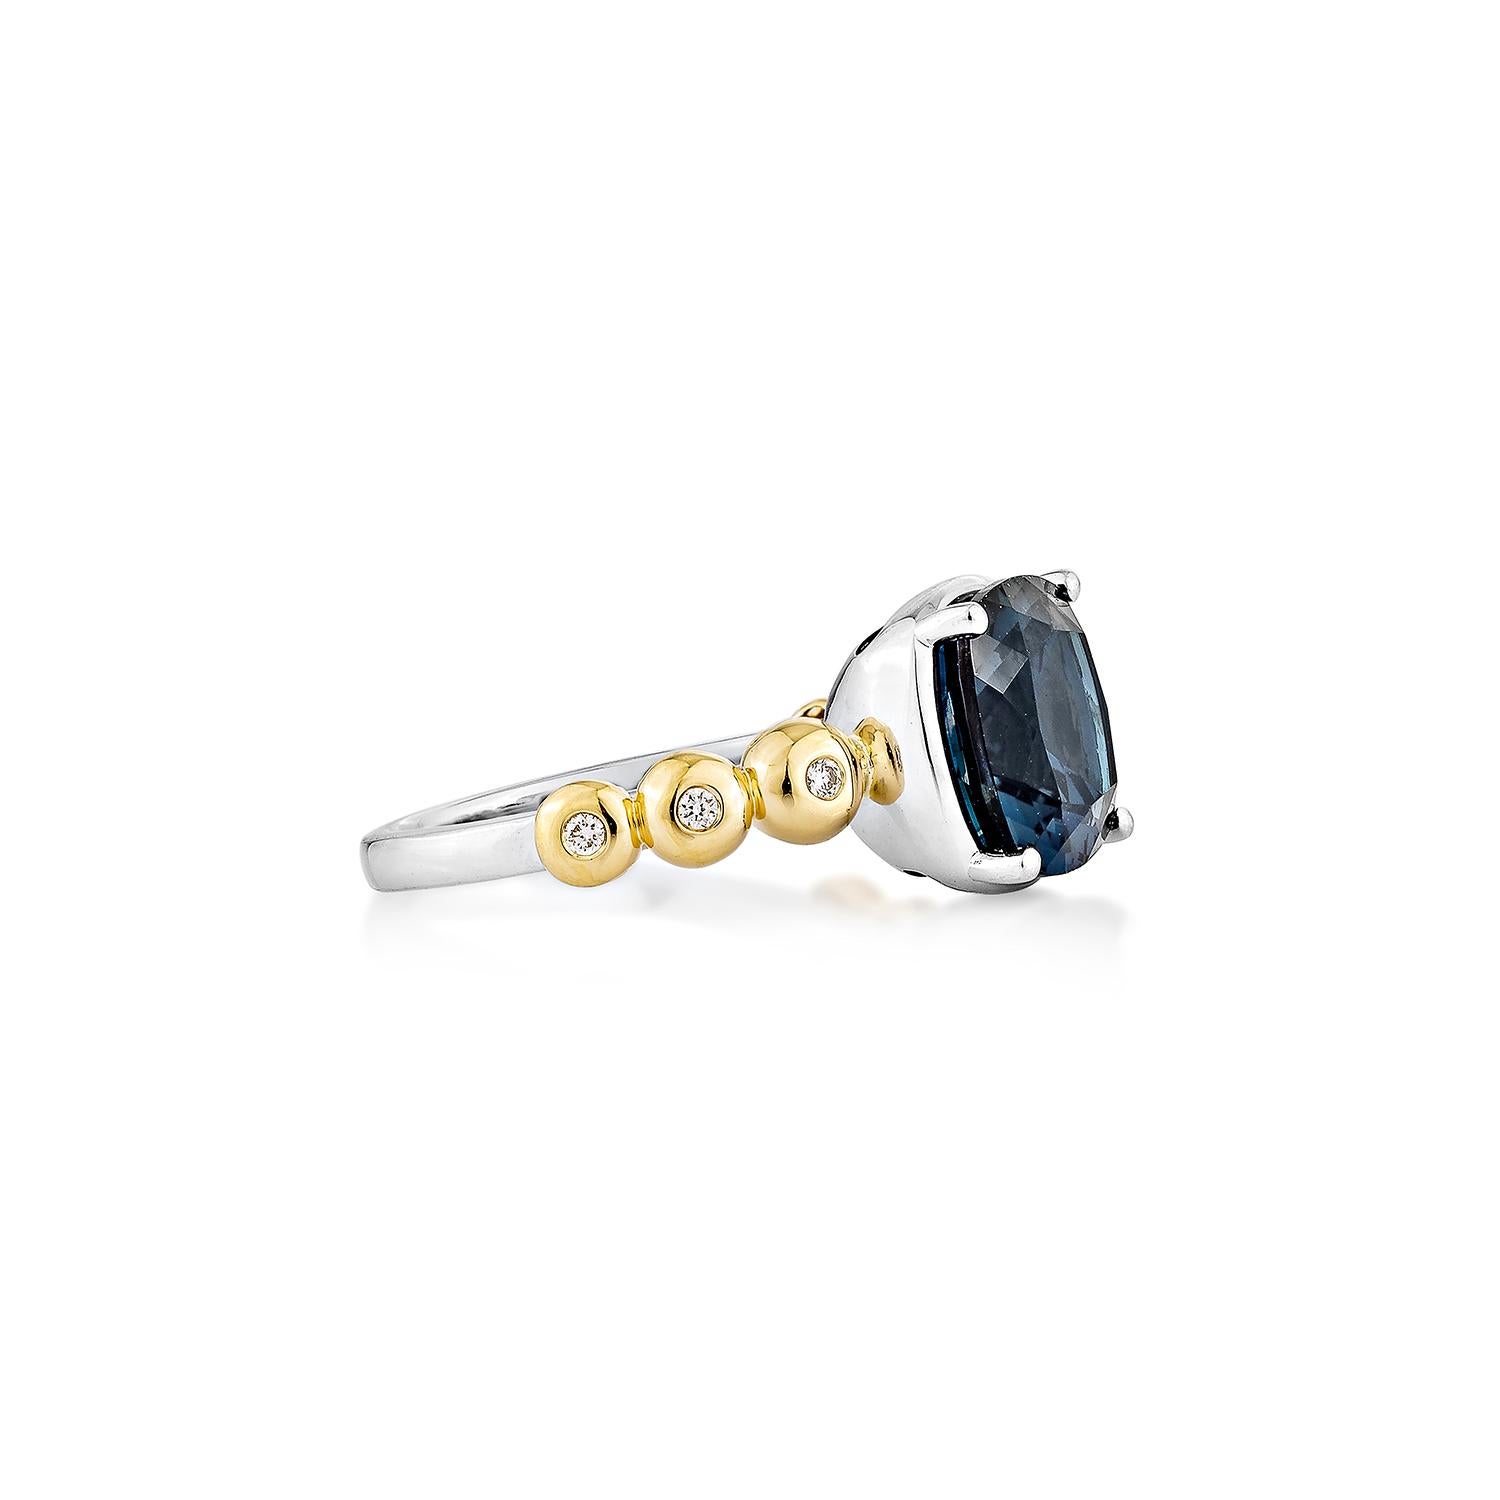 Introducing a new ring style that represents luxury, fashion, and personal flair. The collection includes antique rings adorned with beautiful London blue topaz gemstones. One standout piece is a London blue topaz ring surrounded by dazzling